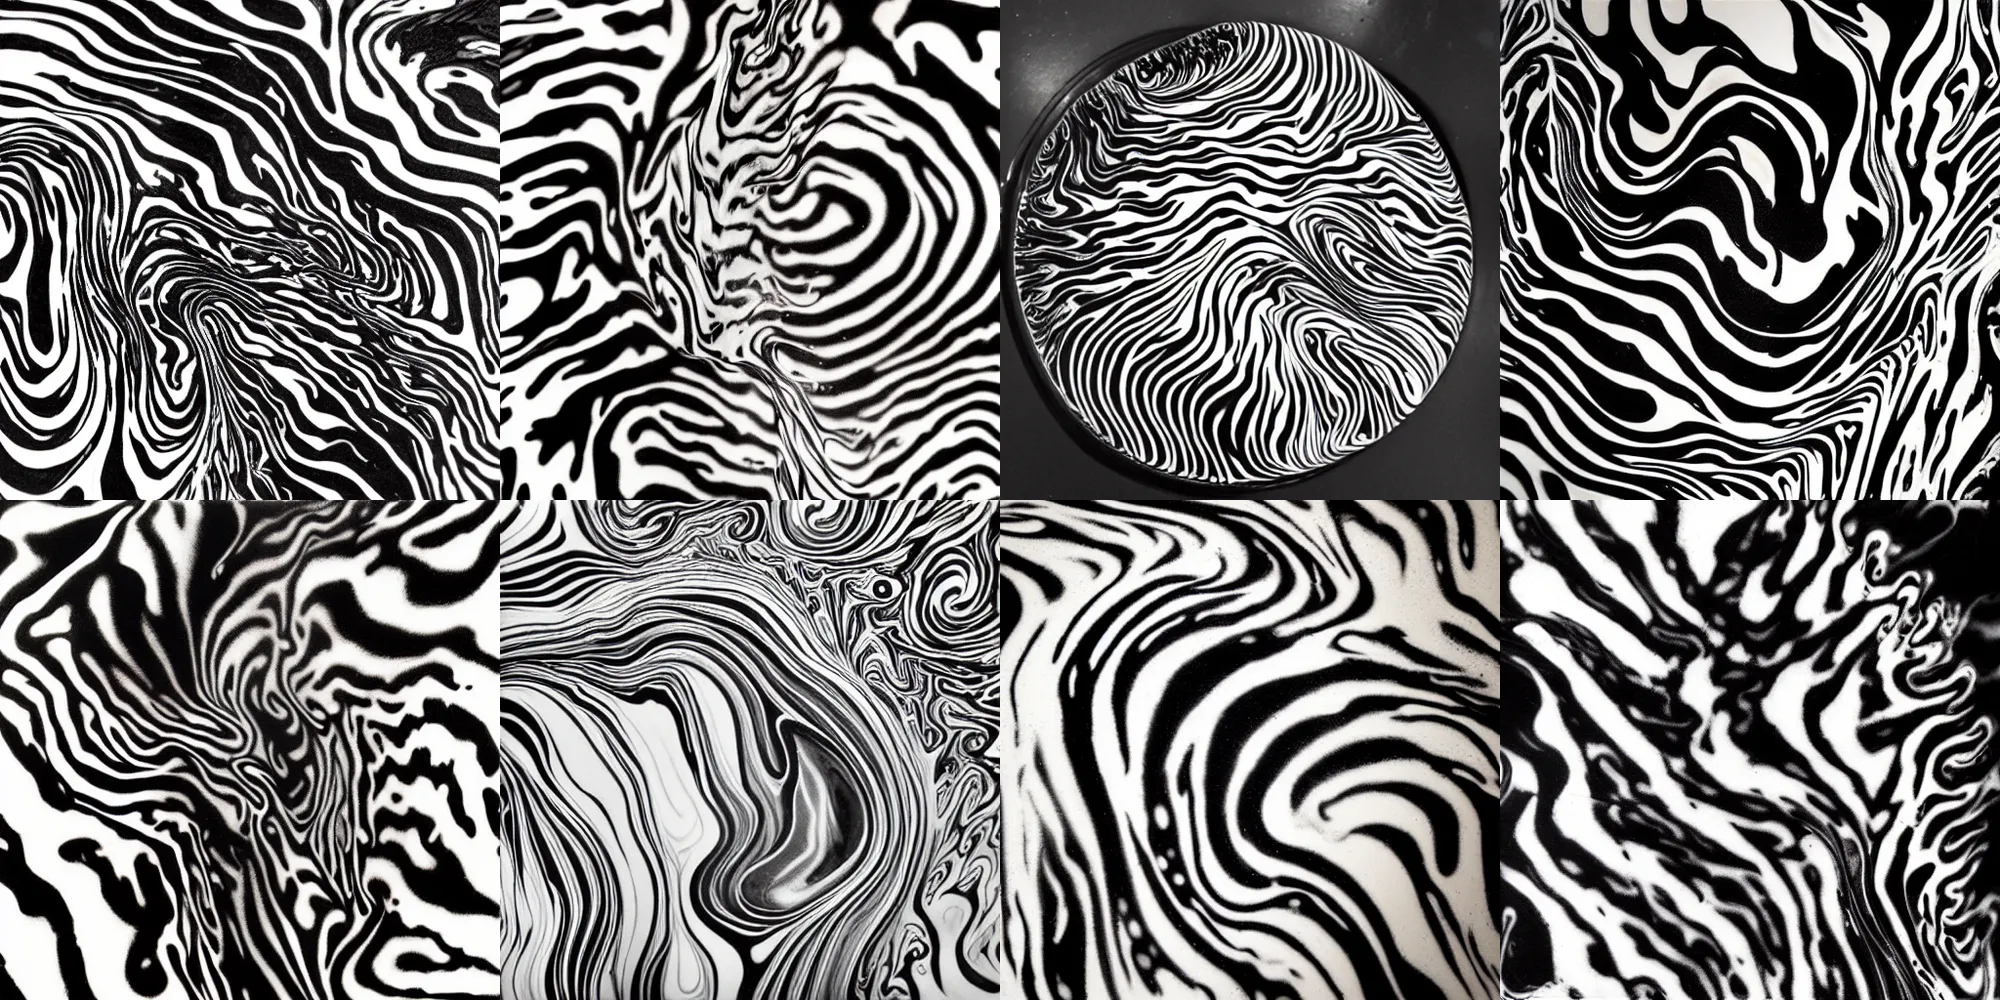 Prompt: latte art, reaction diffusion, water, abstract, liquid, swirly, black and white tiger, ink, latte art, by james jean